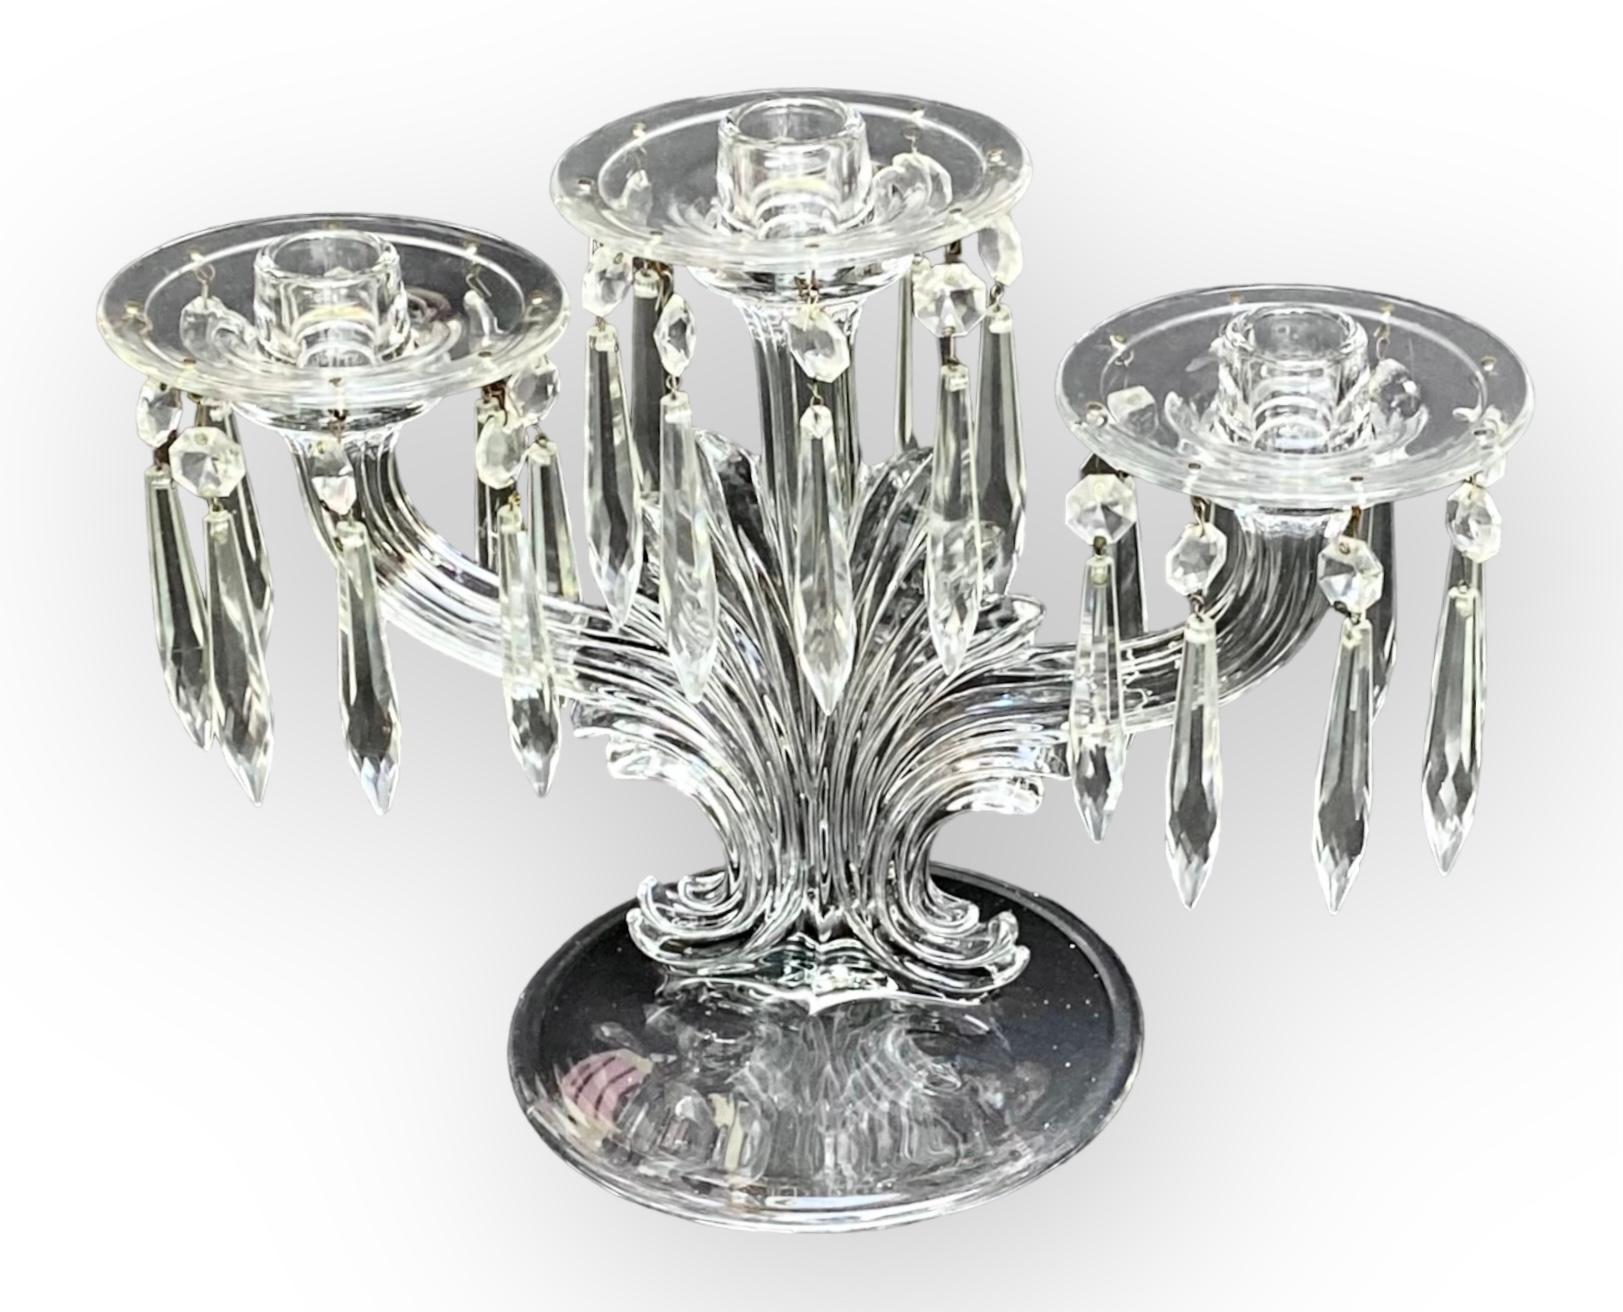 Pair of American Pressed Glass Three Light Candelabra, Early 20th C., on Swirled For Sale 4